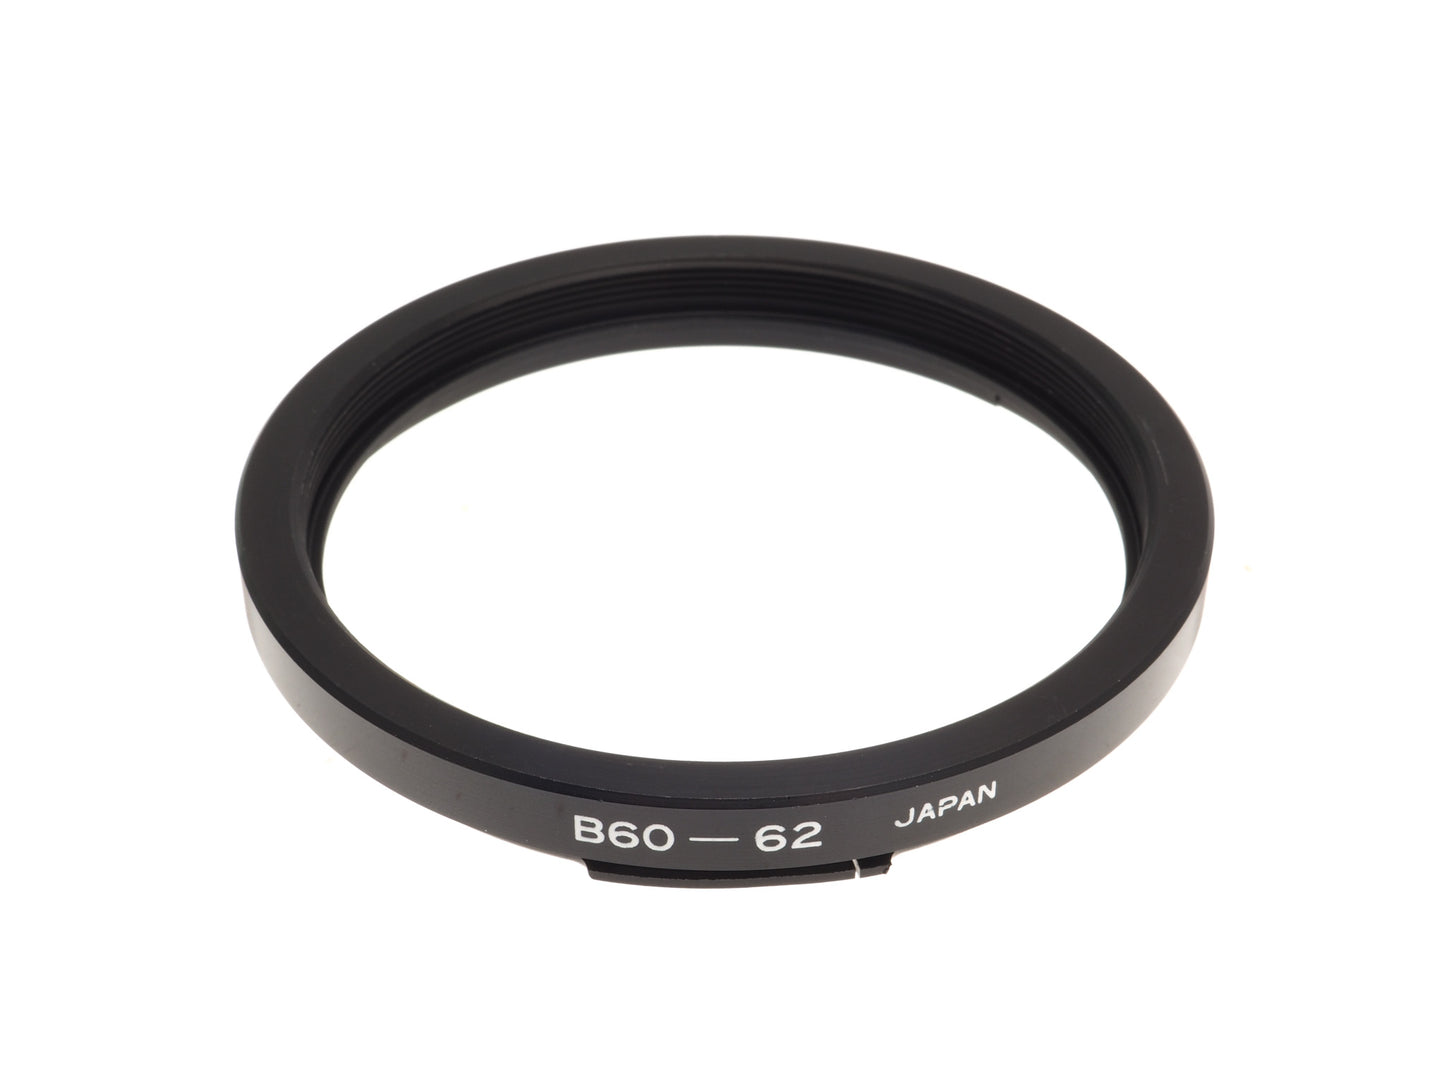 Panagor B60 - 62mm Step-Up Ring - Accessory